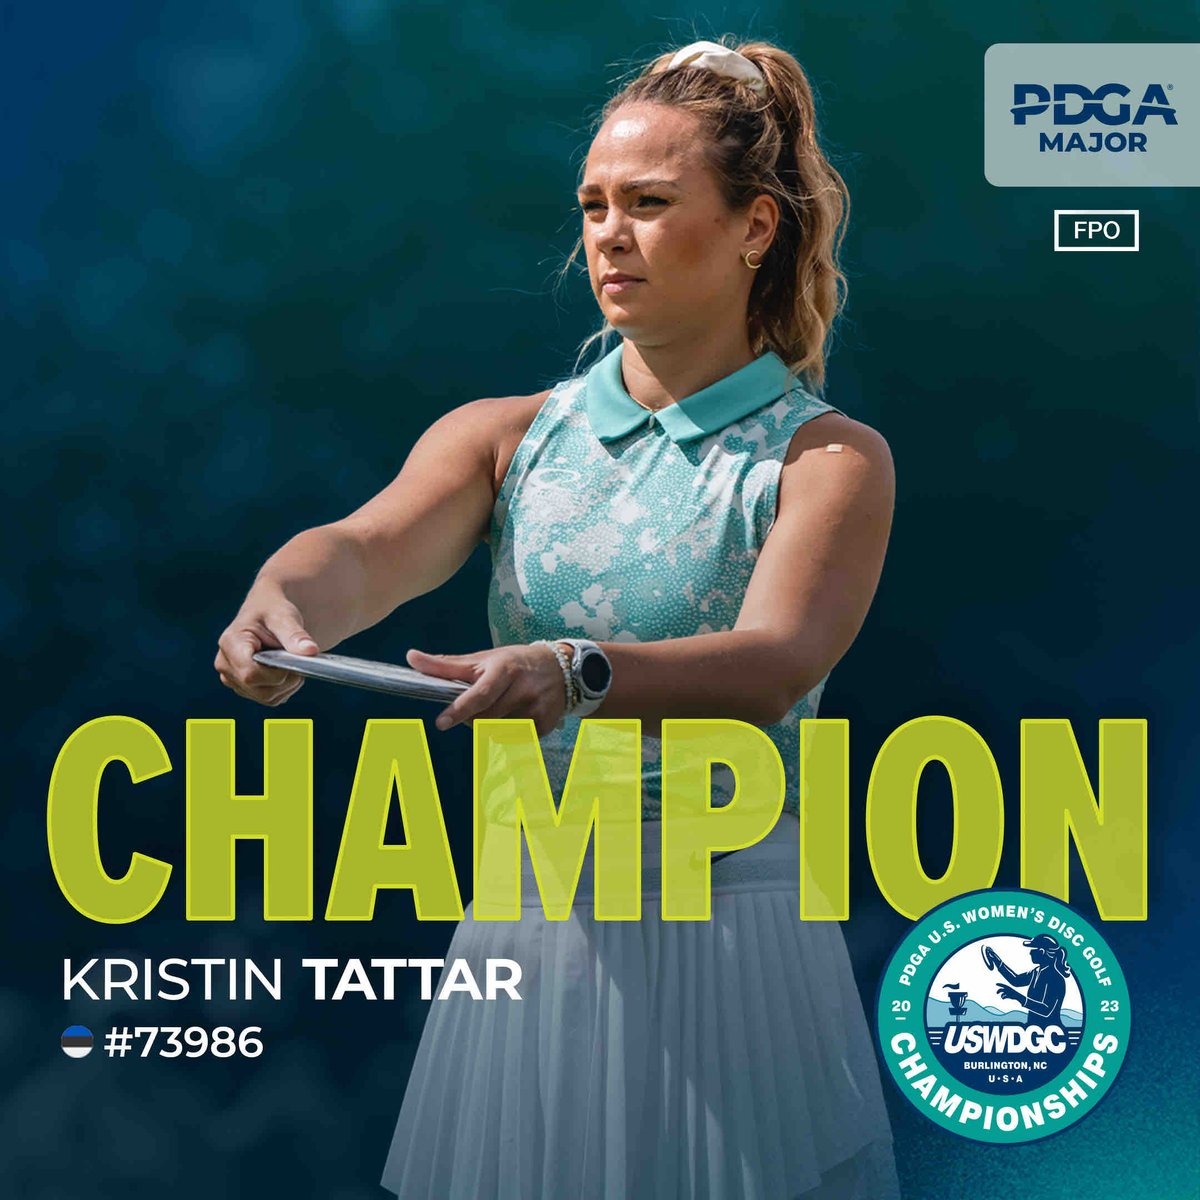 Your 2023 PDGA United States Women’s Disc Golf Champion, Kristin Tattar! Tattar’s second USWDGC title and sixth PDGA Major title completes the FPO season grand slam of the Majors for the first time in history. #2023USWDGC #discgolf